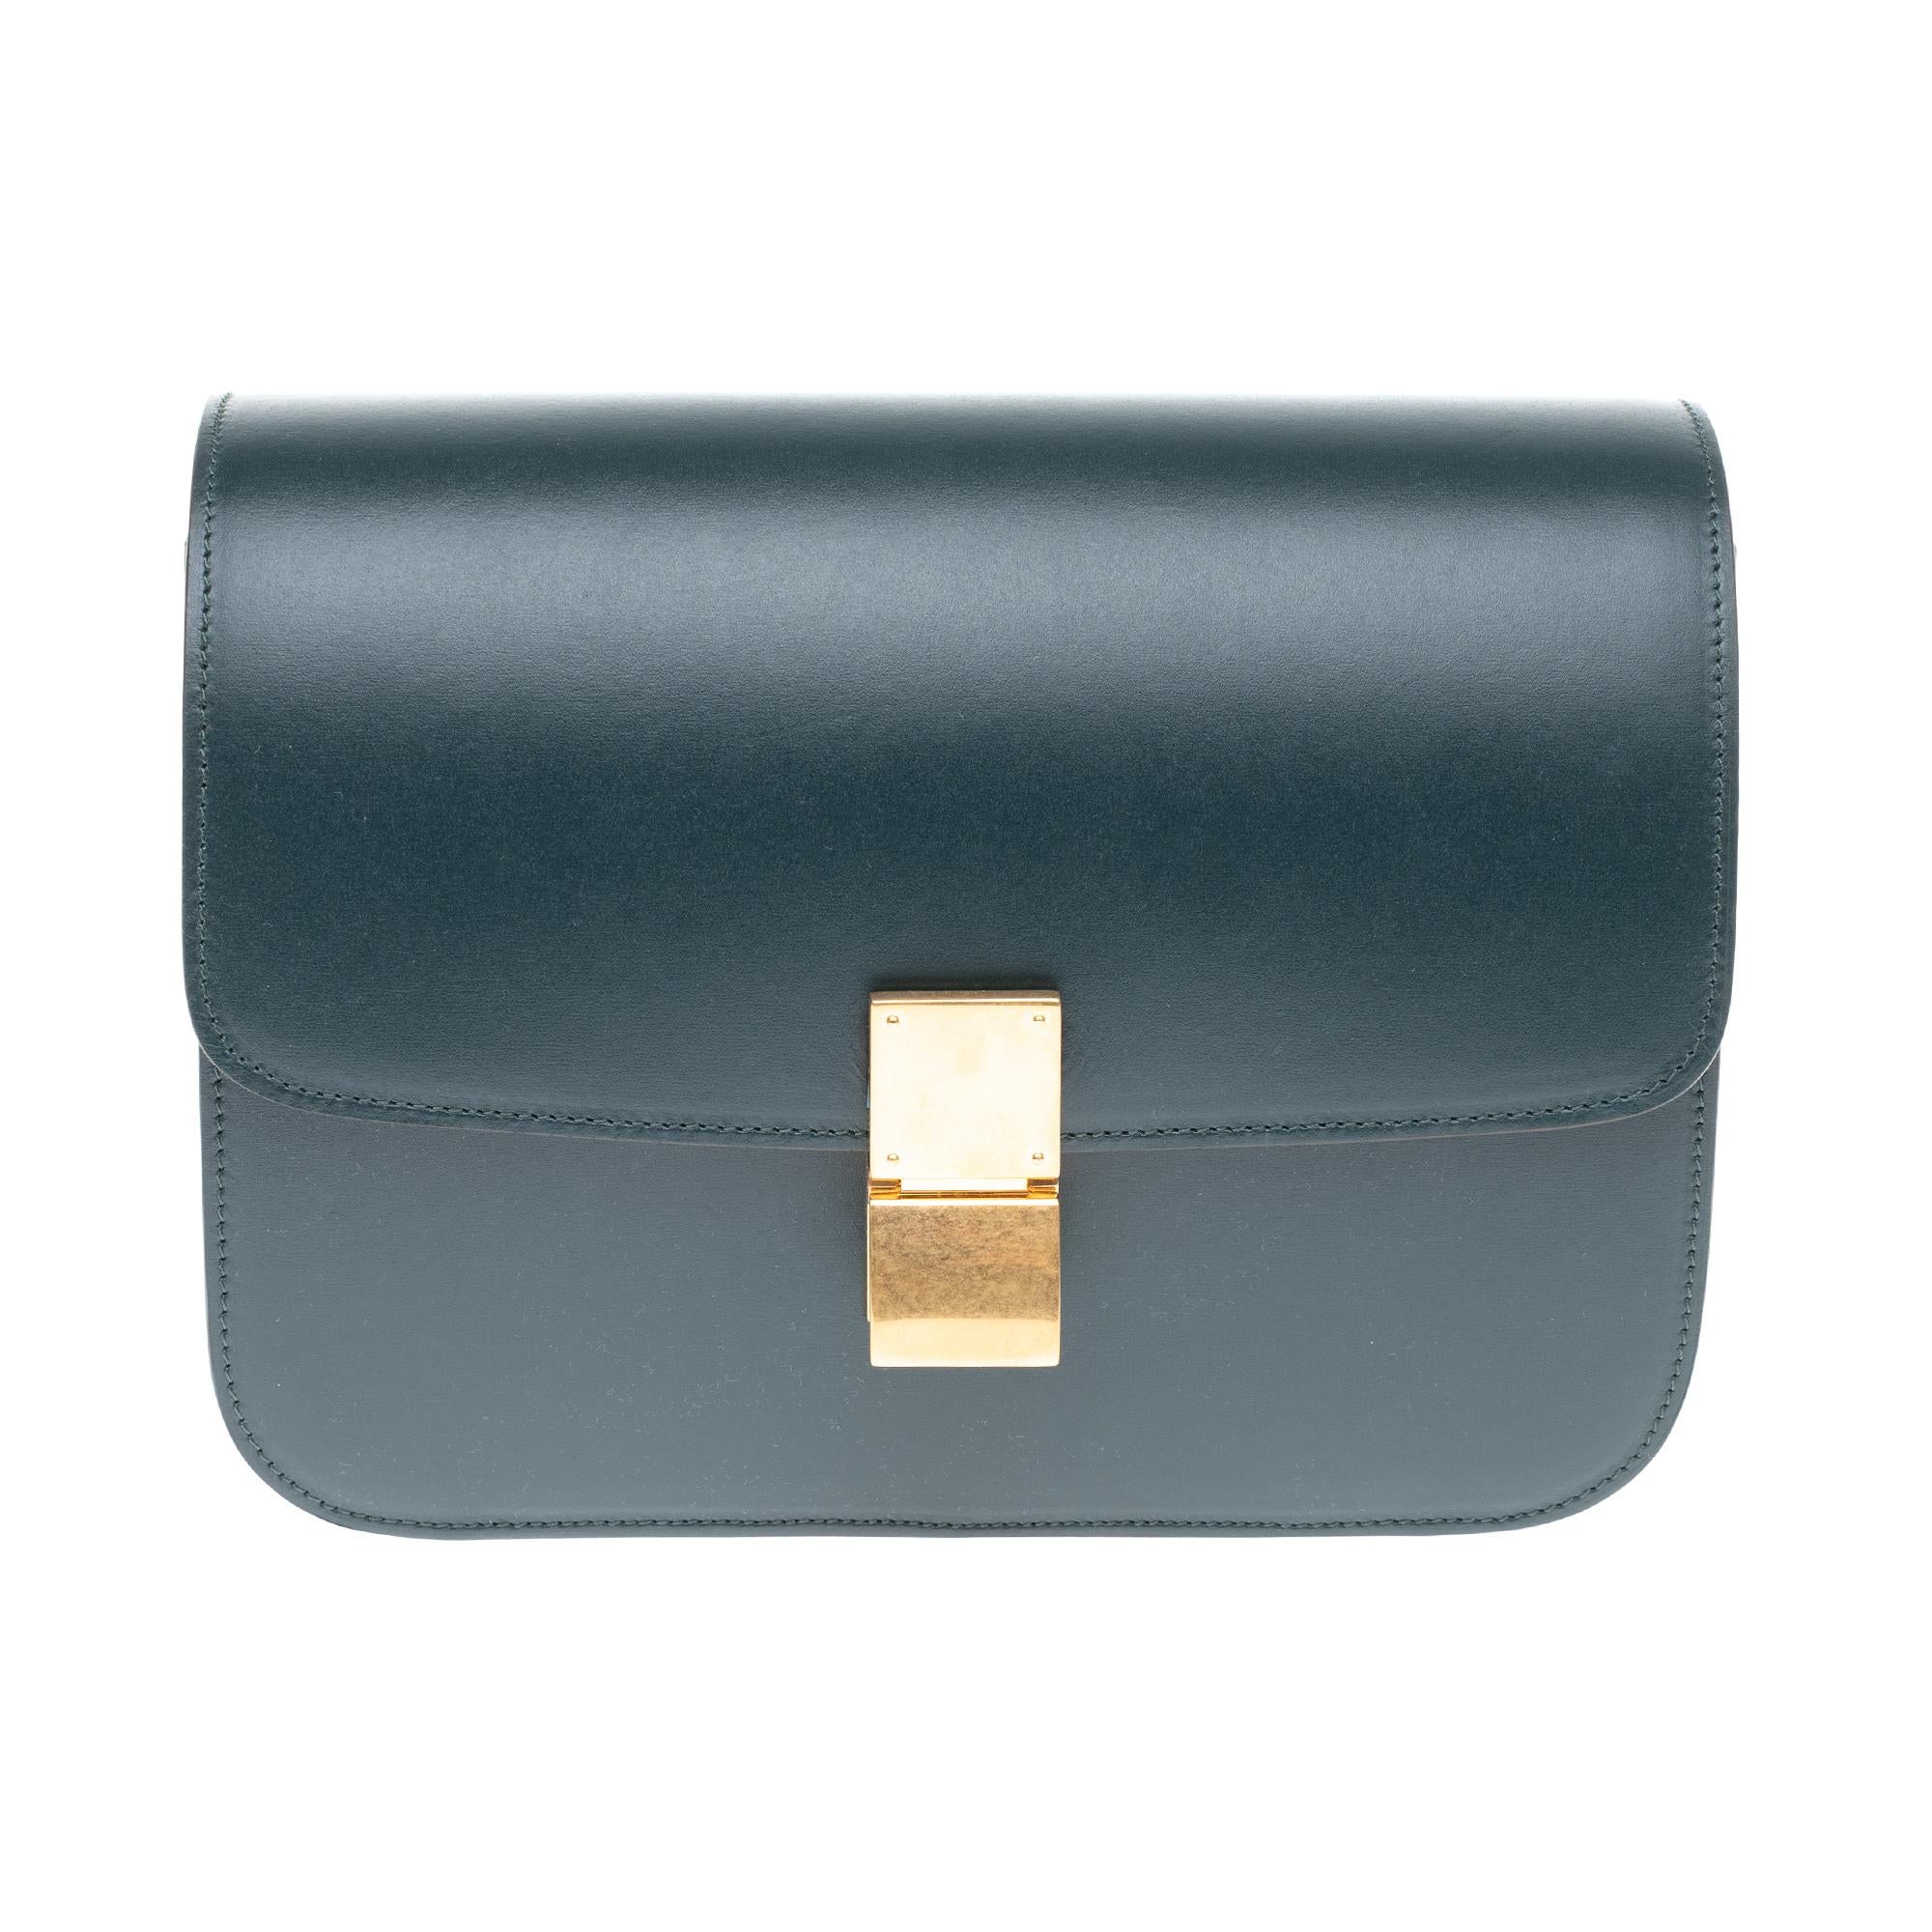 Chic Celine Classic Box shoulder bag in green calfskin leather , gold metal trim, a handle transformable in green leather allowing a hand carry, shoulder or shoulder strap.
* 45 cm adjustable and removable leather shoulder strap
* Brass closure
*